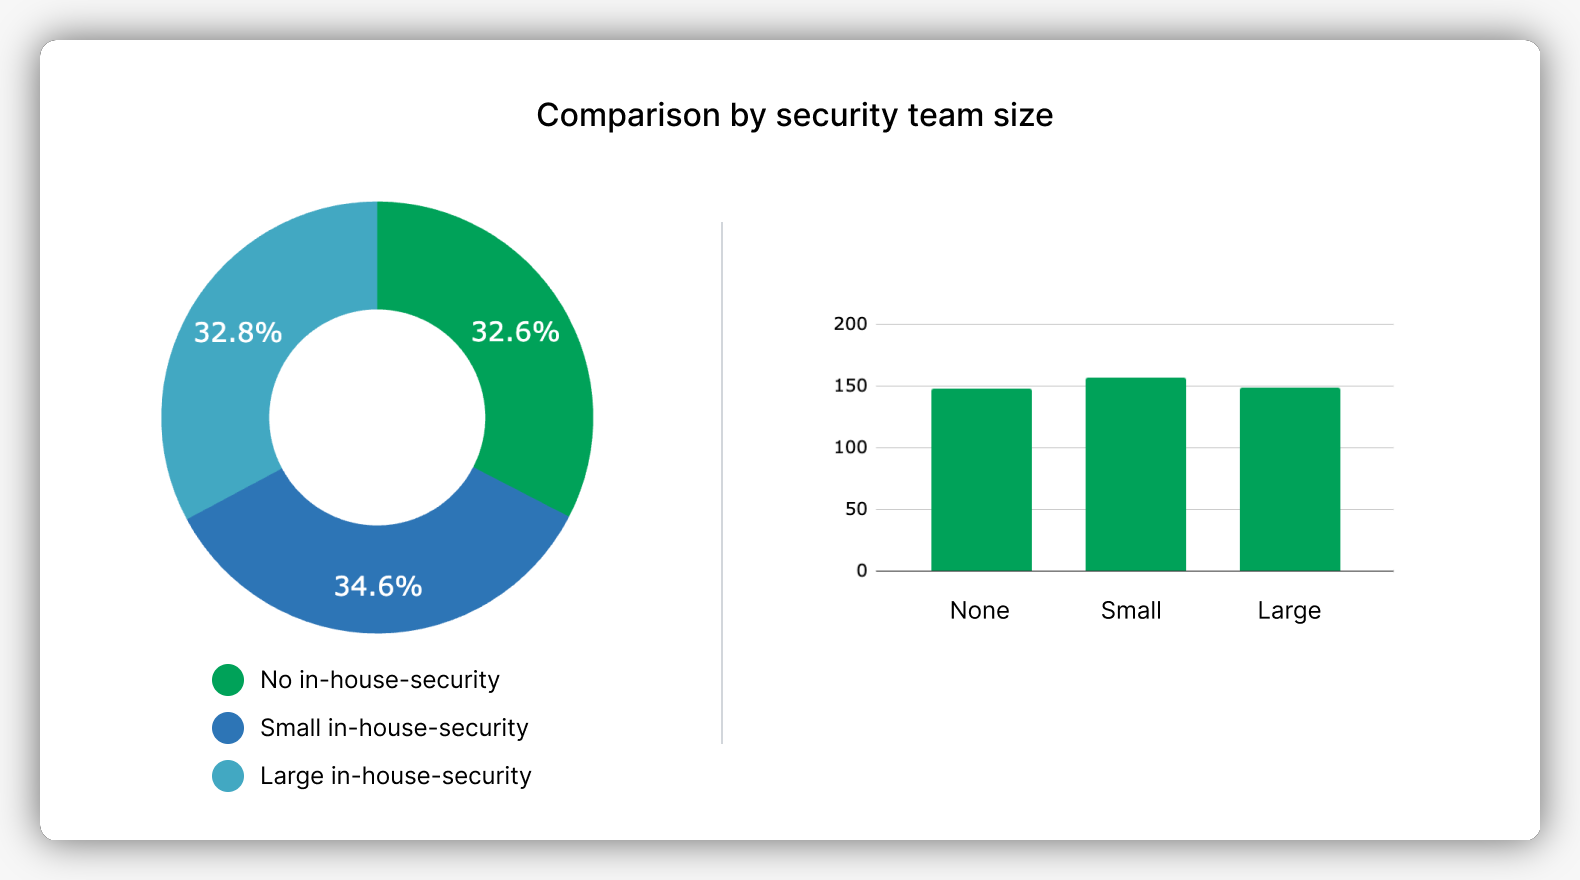 percentages by security team size